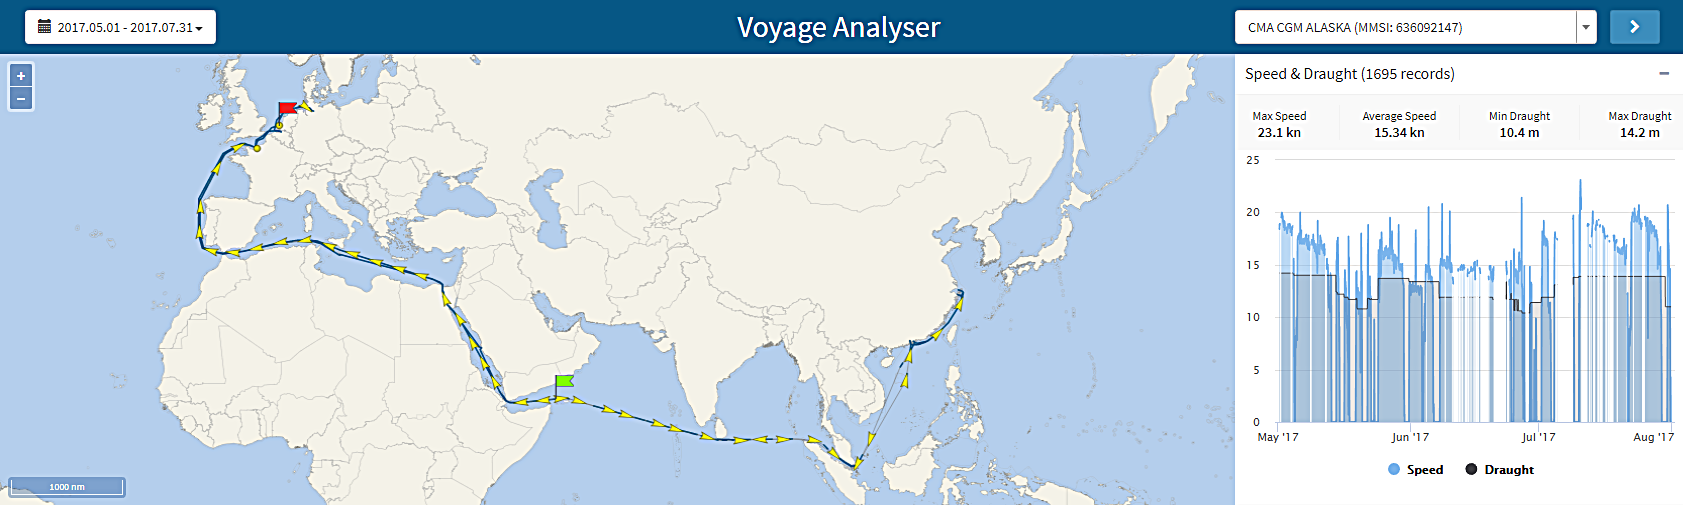 Voyage Analyser - Track the historical ship movements